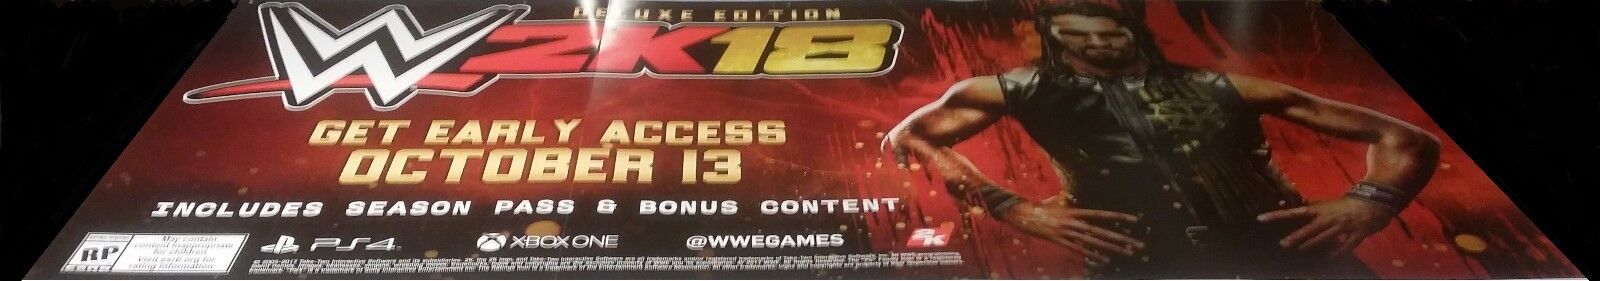 W2K18 OFFICIAL DISPLAY LARGE POSTER Gamestop Advertisment 6FT x 3FT